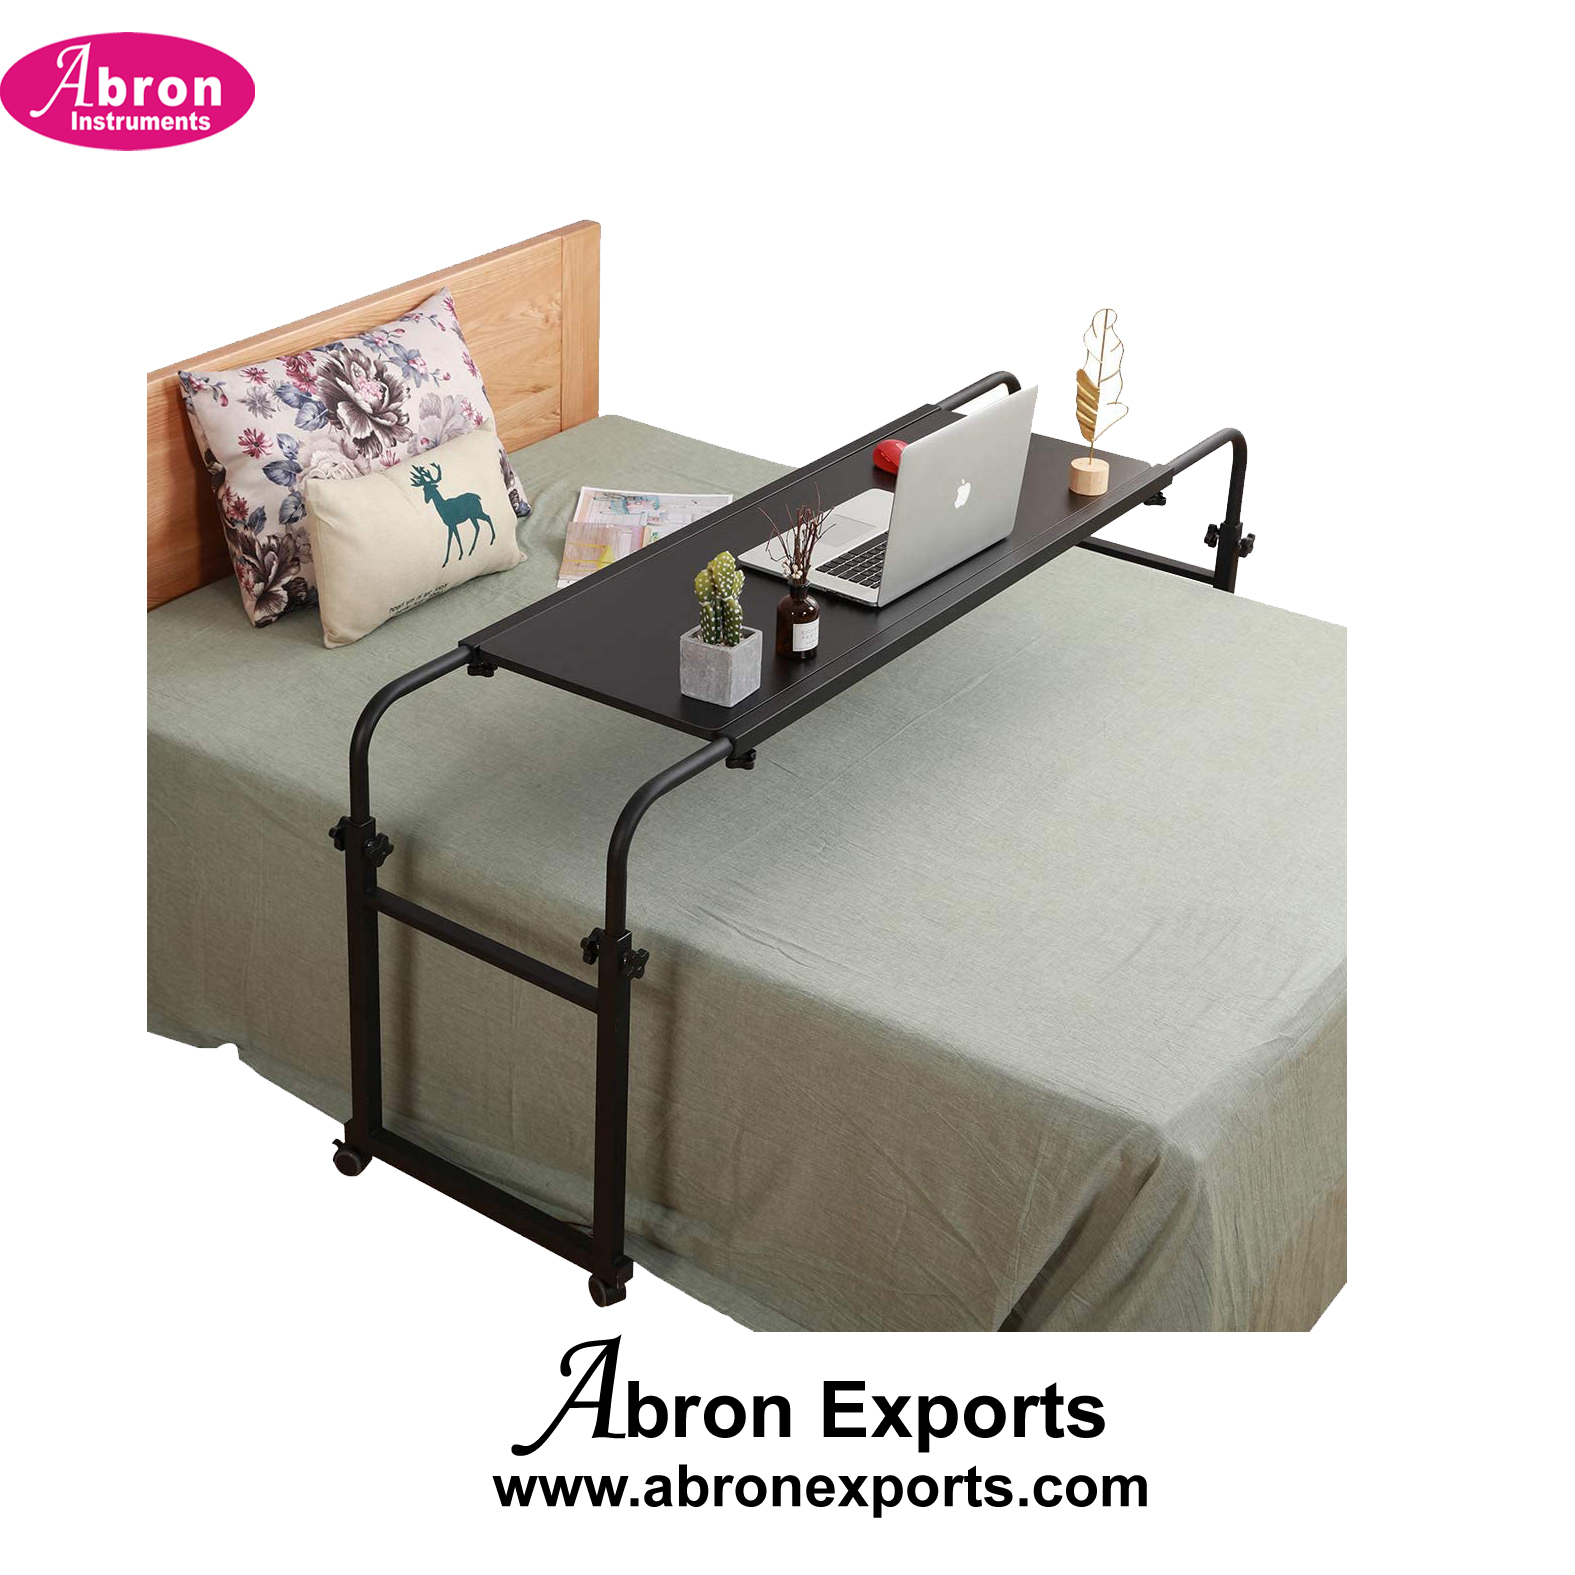 Furniture Overbed Table Multipurpose Trolley steel frame wheels  adjustable Tabletop for Patients and Hospital Bed Abron ABM-2351SW 